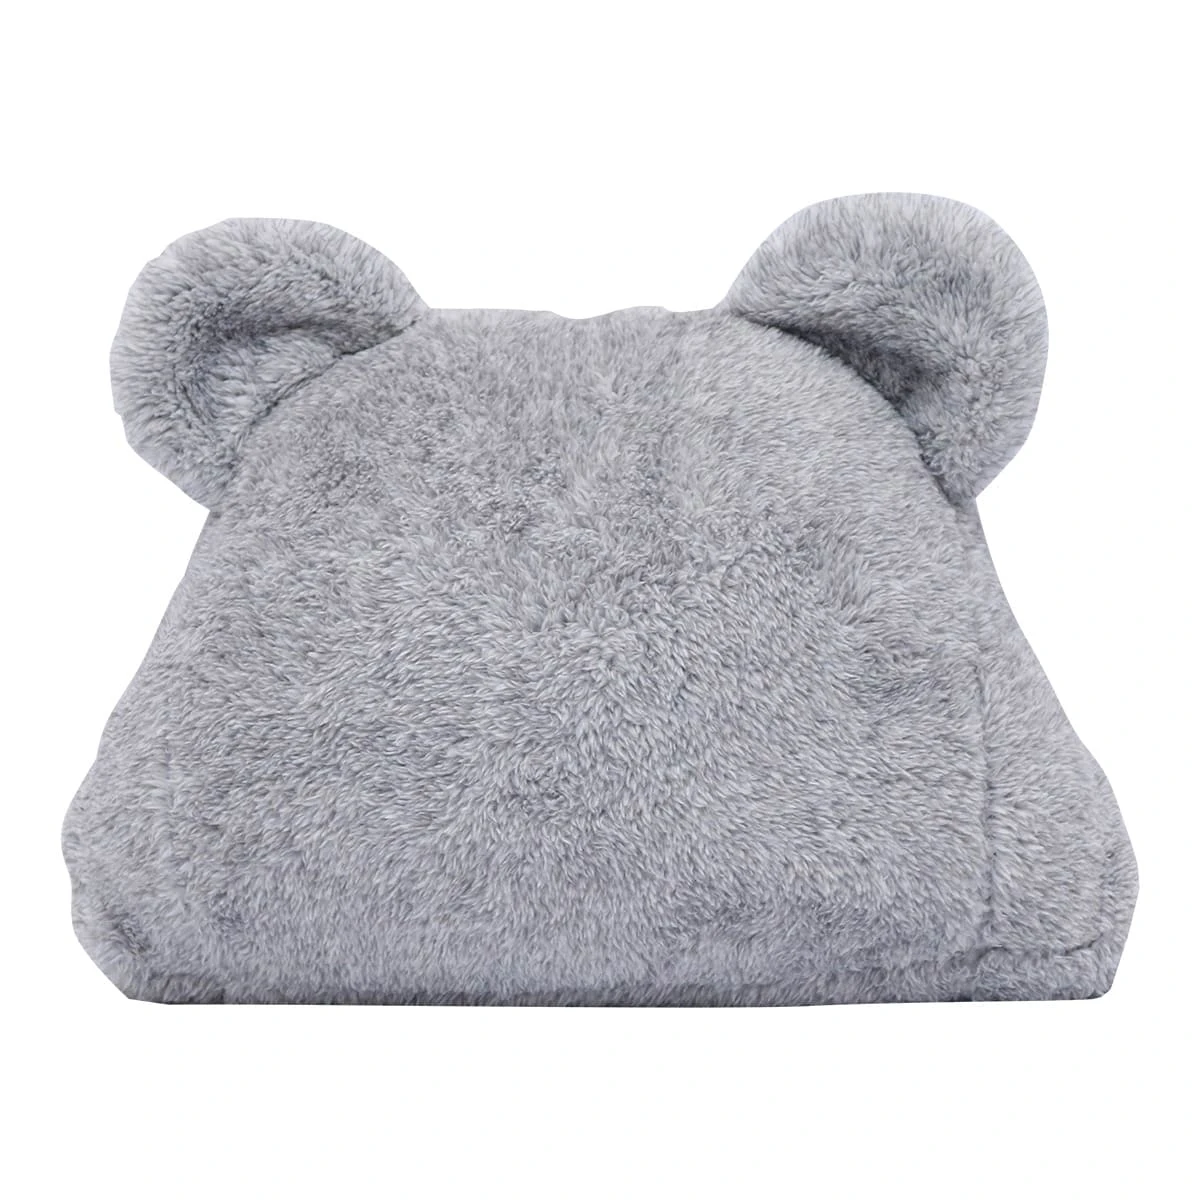 Recycled Polyester Hooded Plush Blanket with Bear Design (Grey)